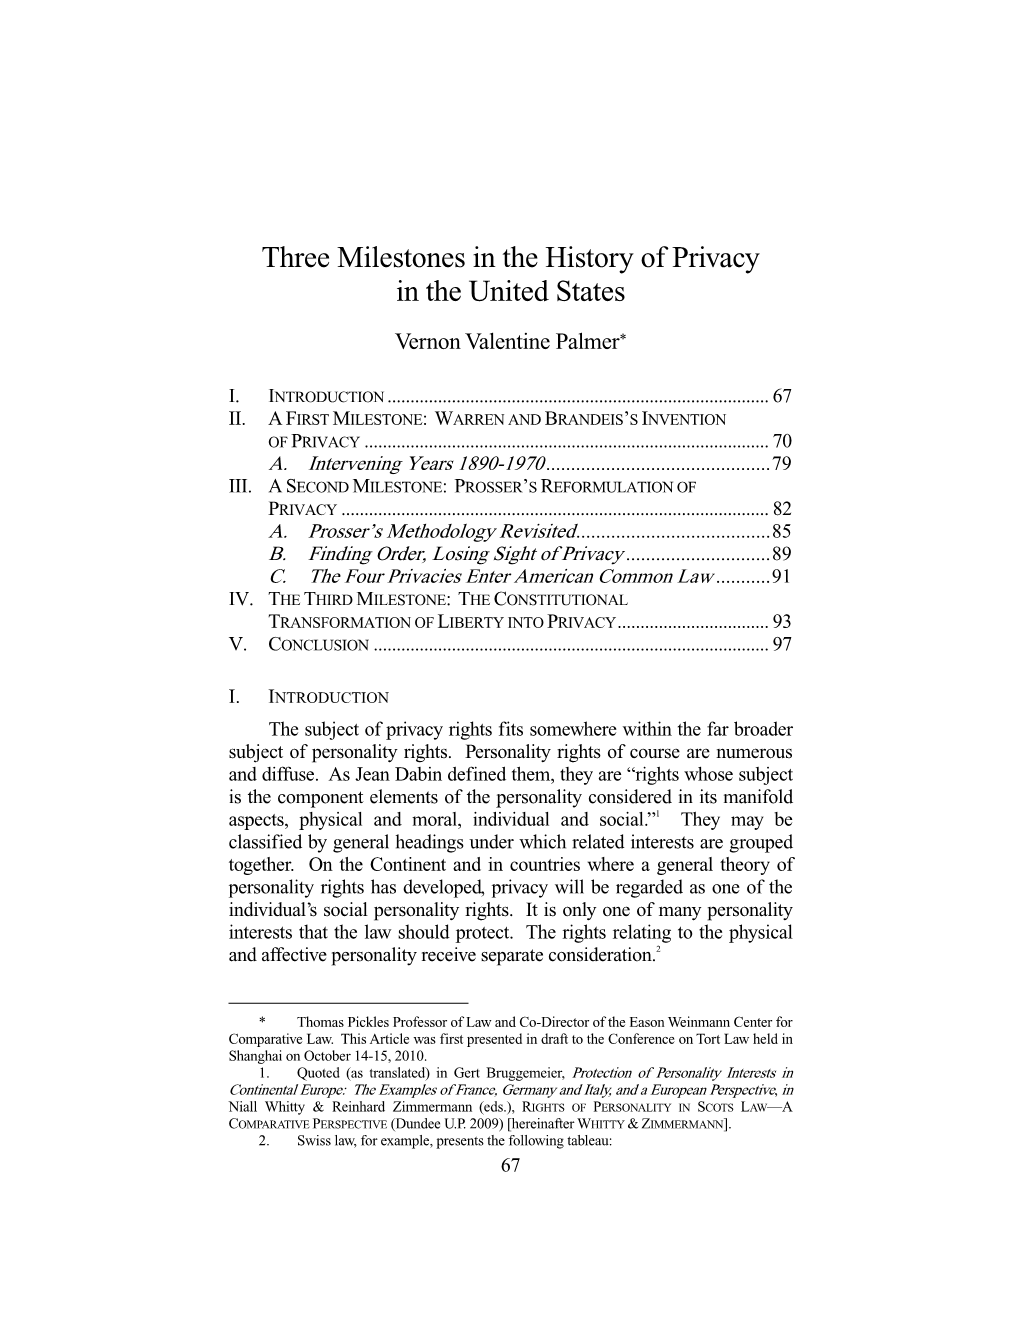 Three Milestones in the History of Privacy in the United States